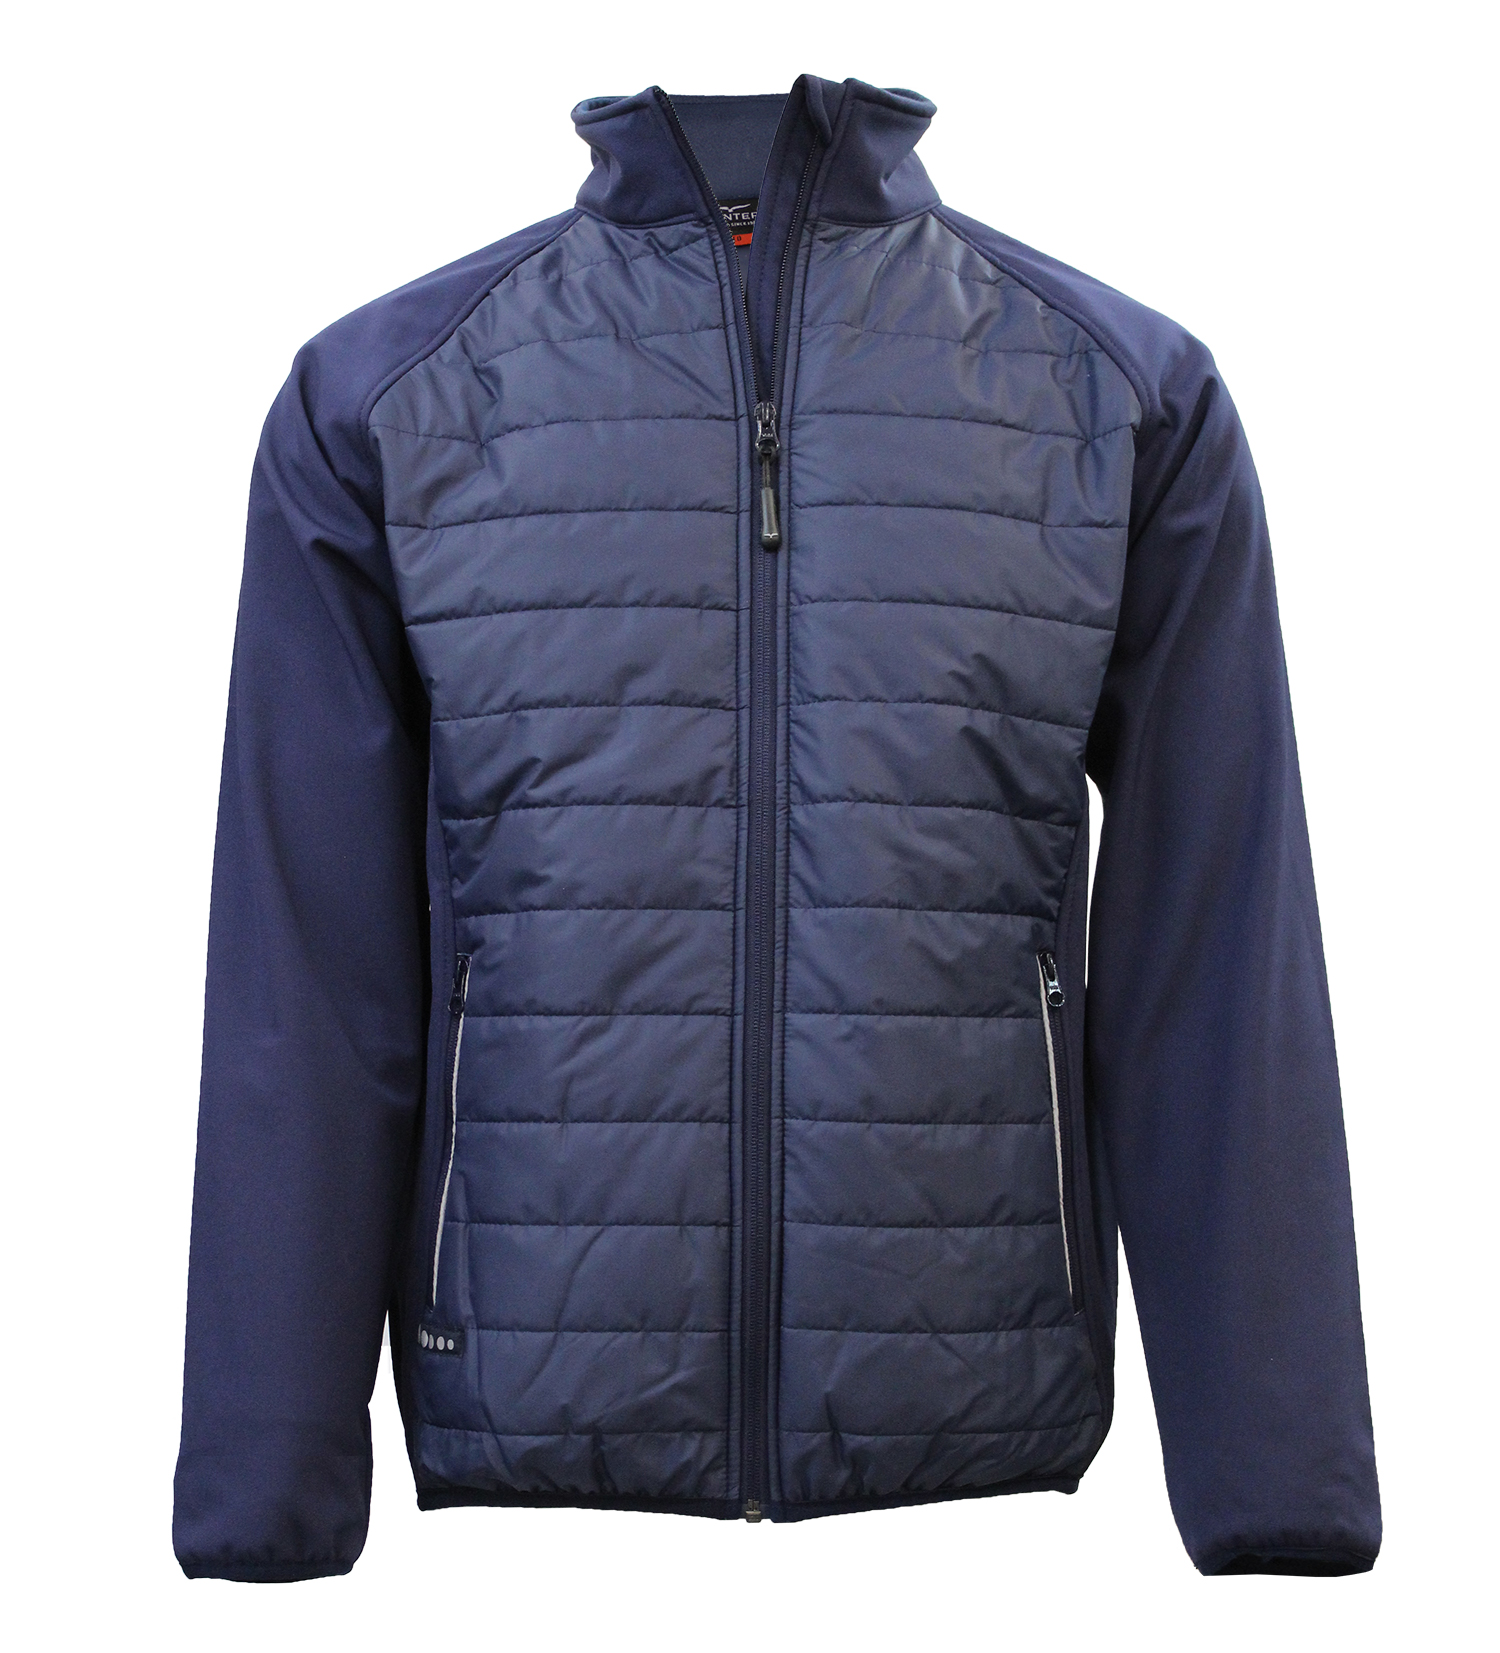 Navy School Jacket - SPECIAL OFFER - (Collection only)